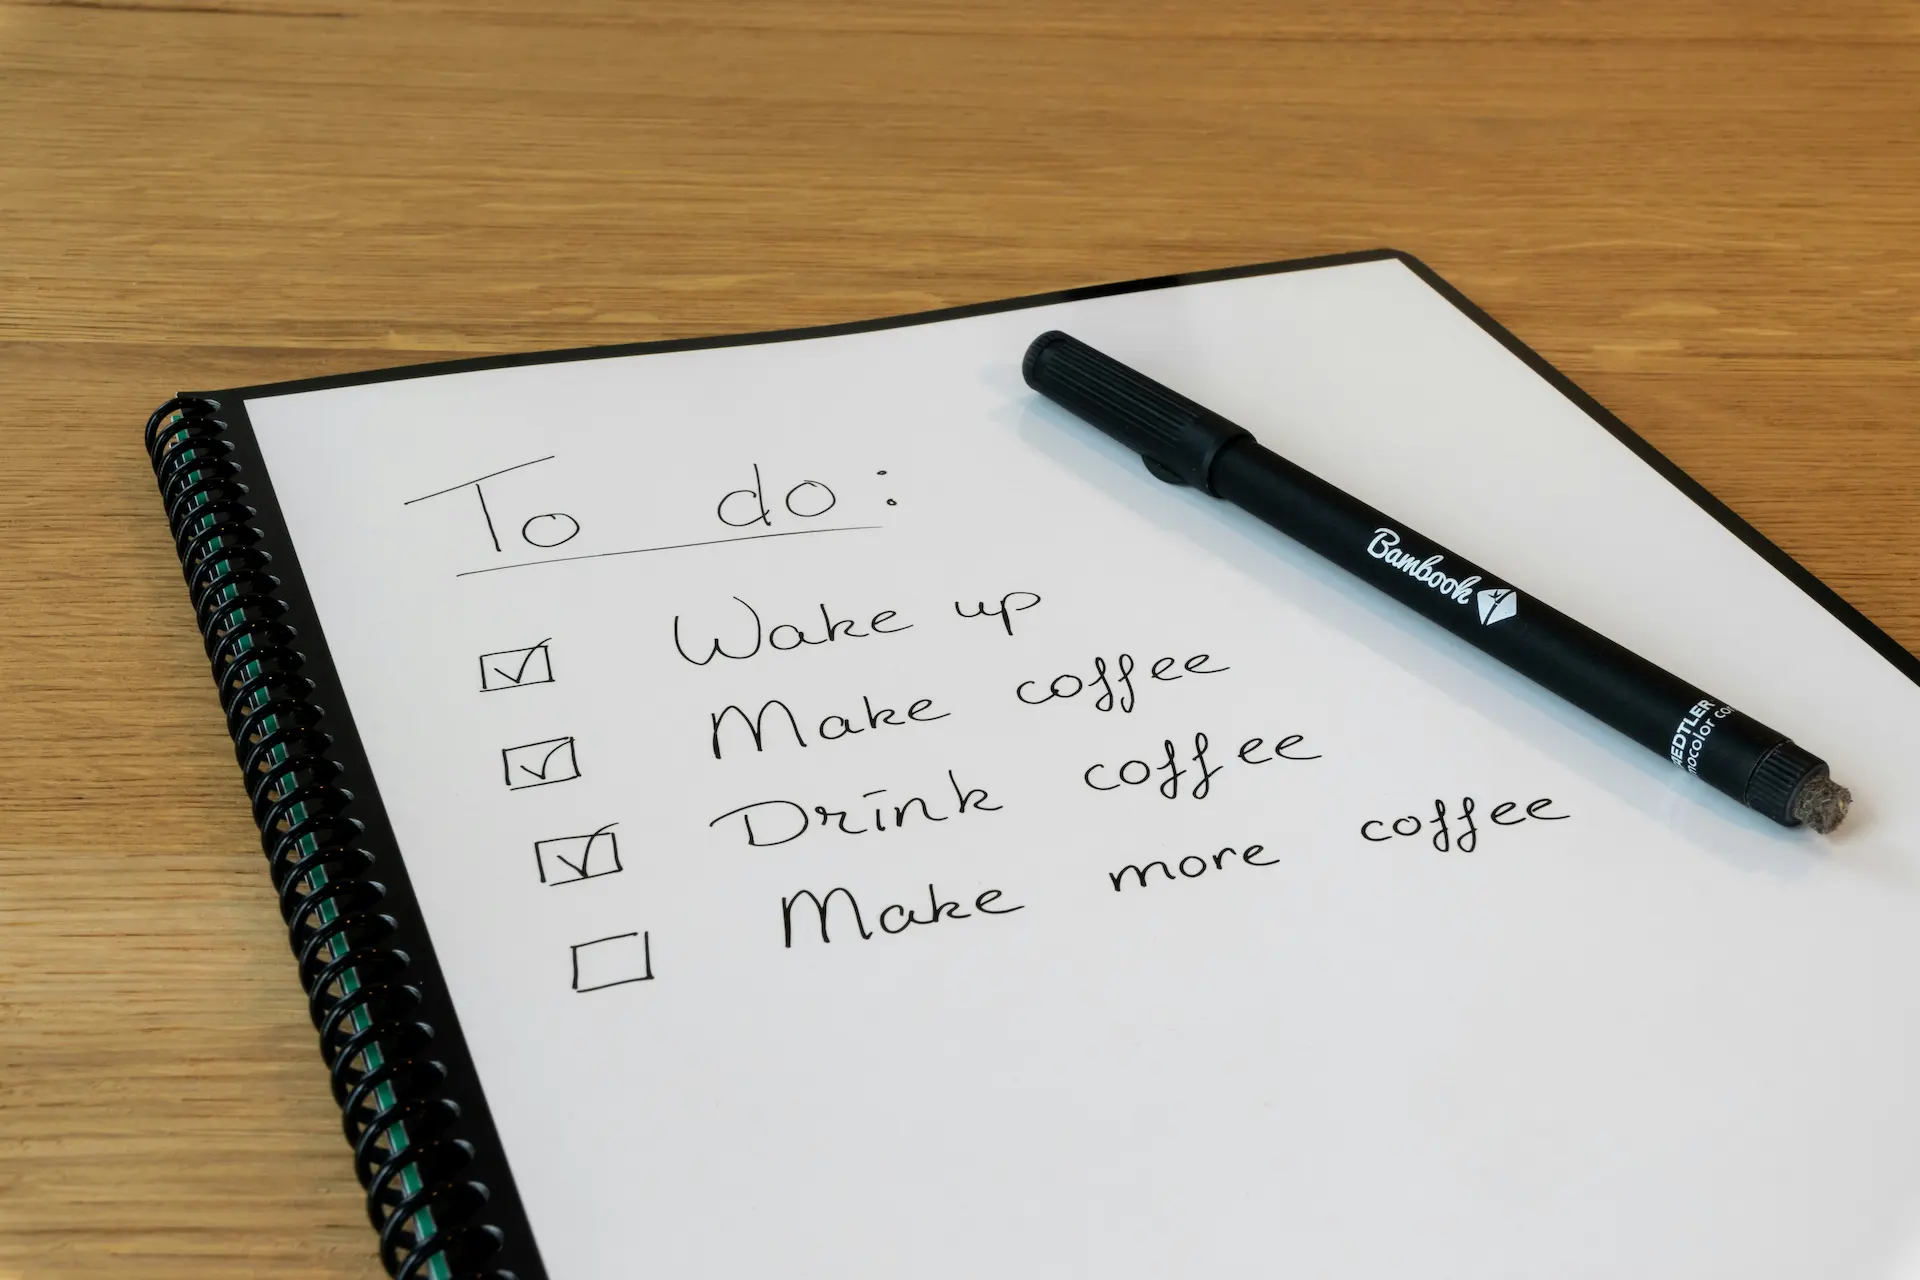 Checklist of morning to-do items around coffee consumption. Make more coffee is left unchecked.